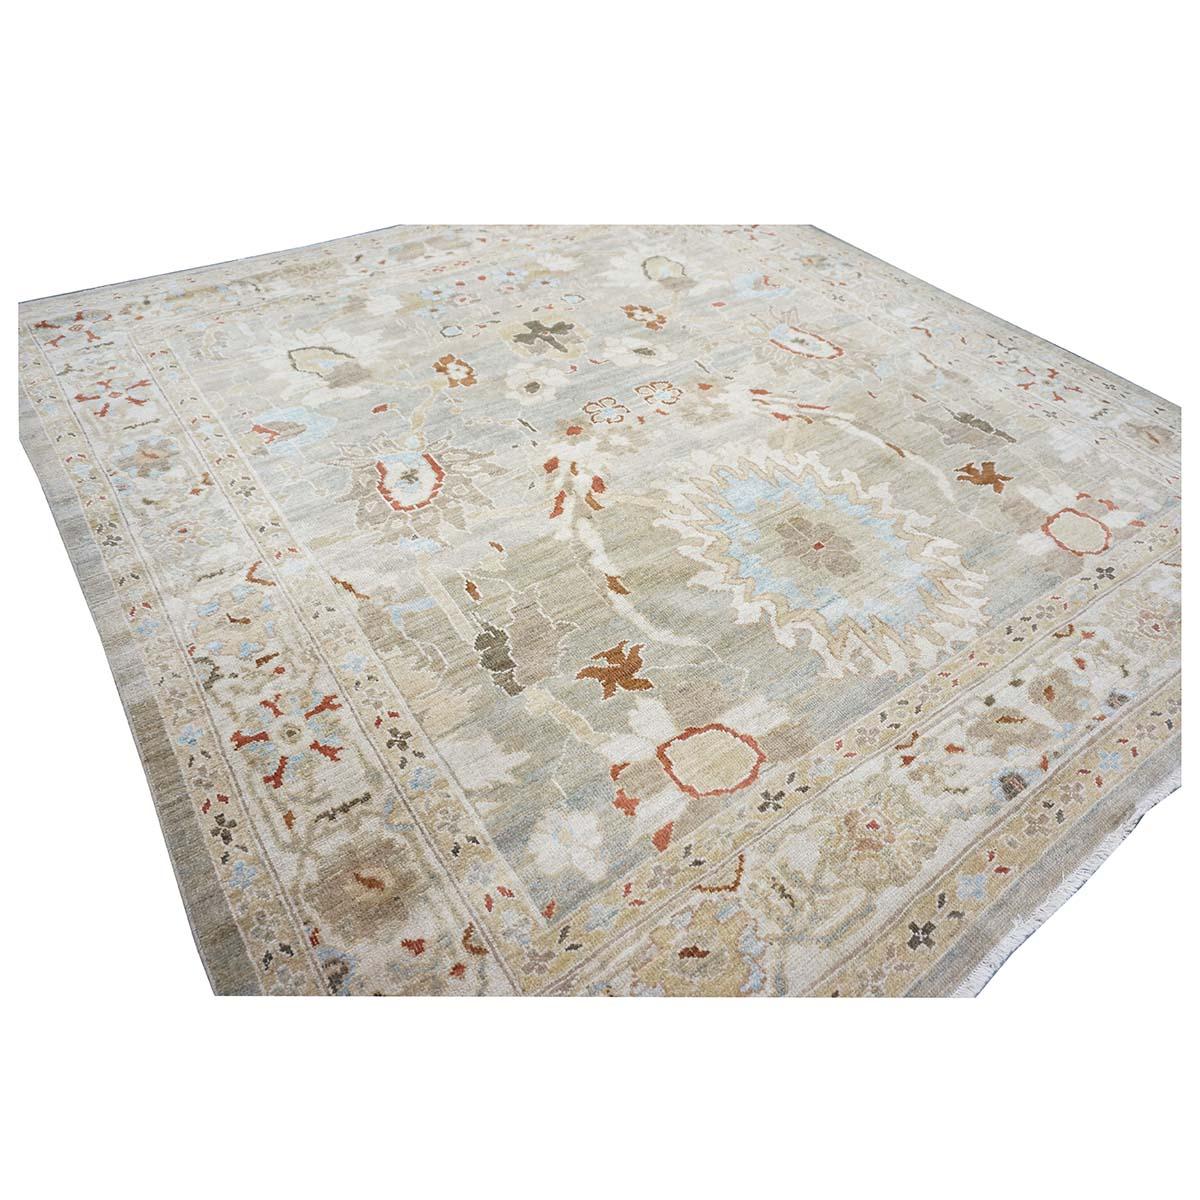 Hand-Woven 21st Century Persian Sultanabad 8x8 Square Tan, Blue, & Ivory Handmade Area Rug For Sale